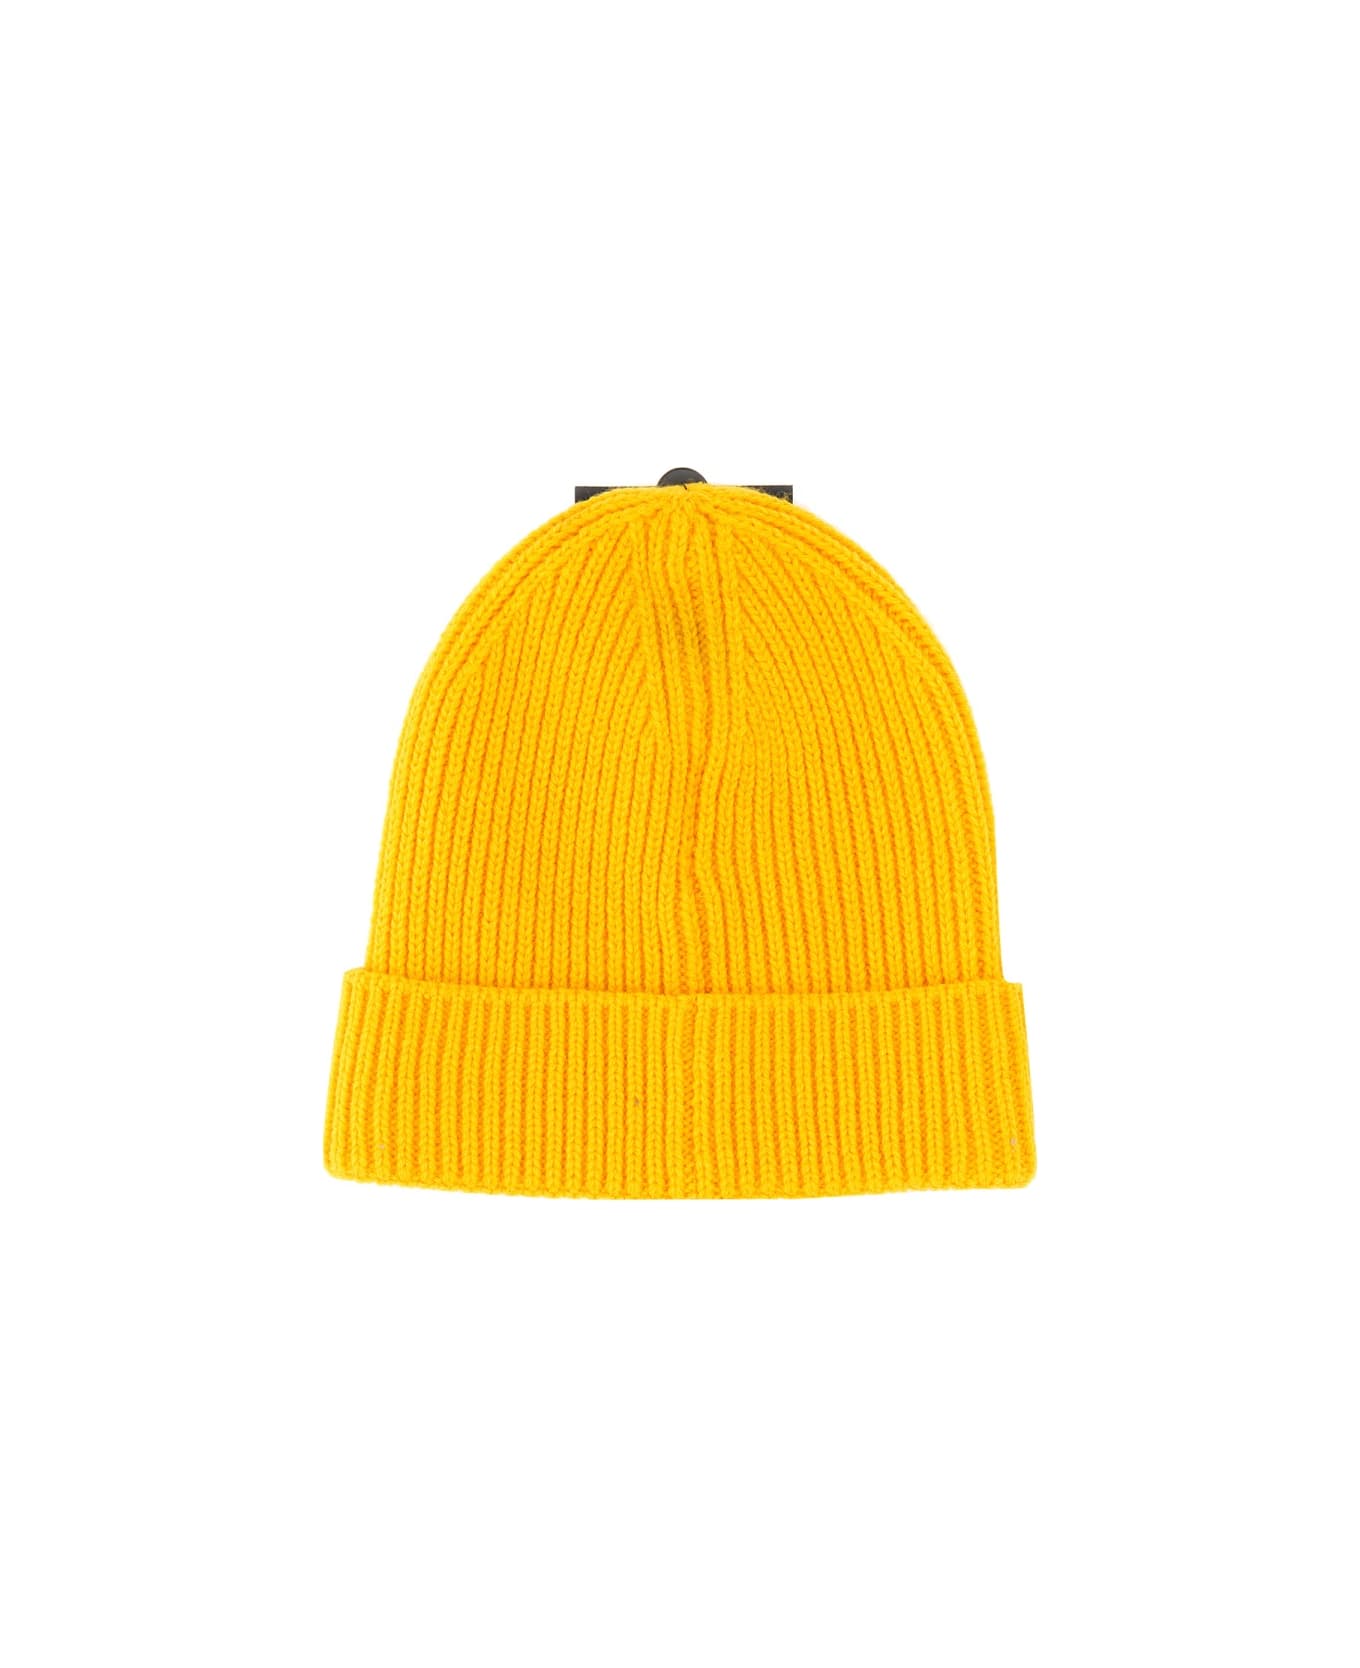 The North Face Beanie Hat - YELLOW